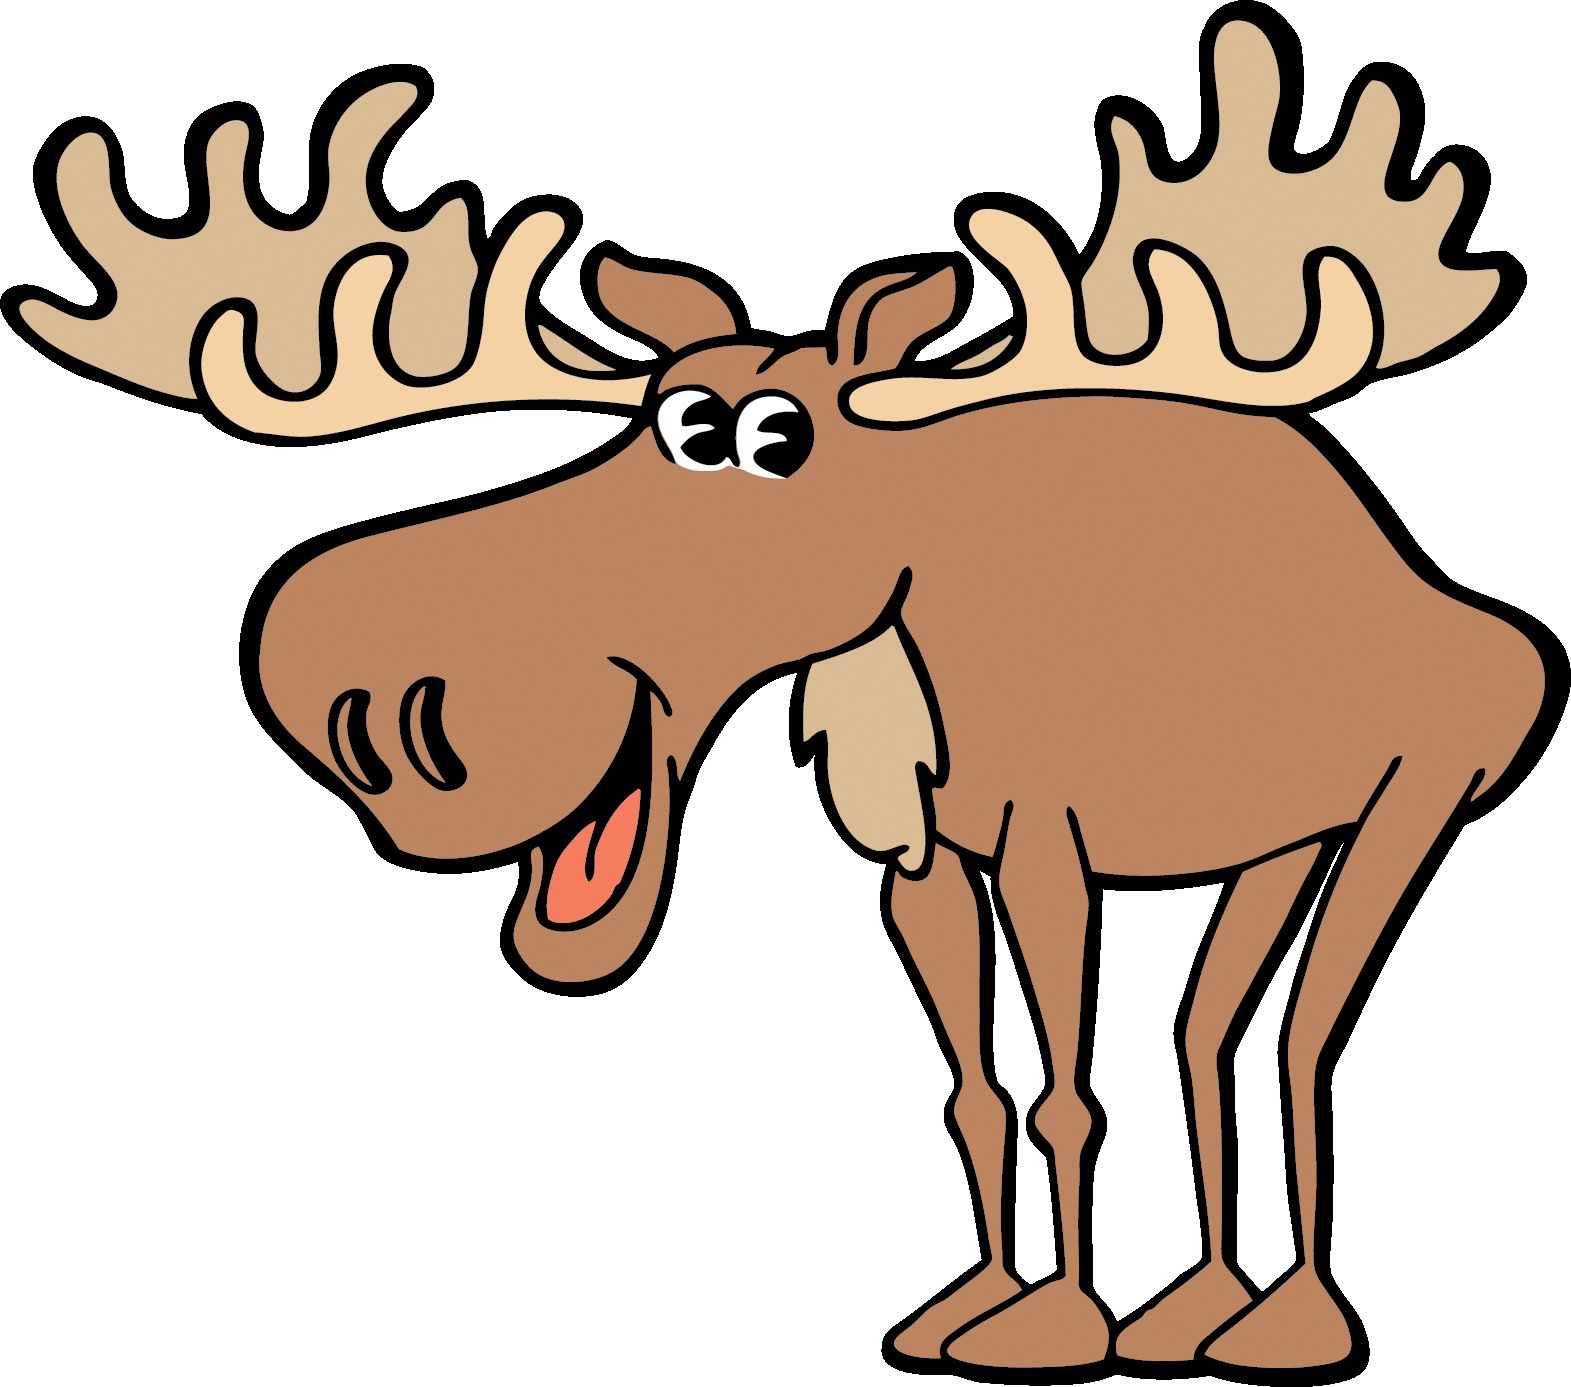 Woodsy The Moose.